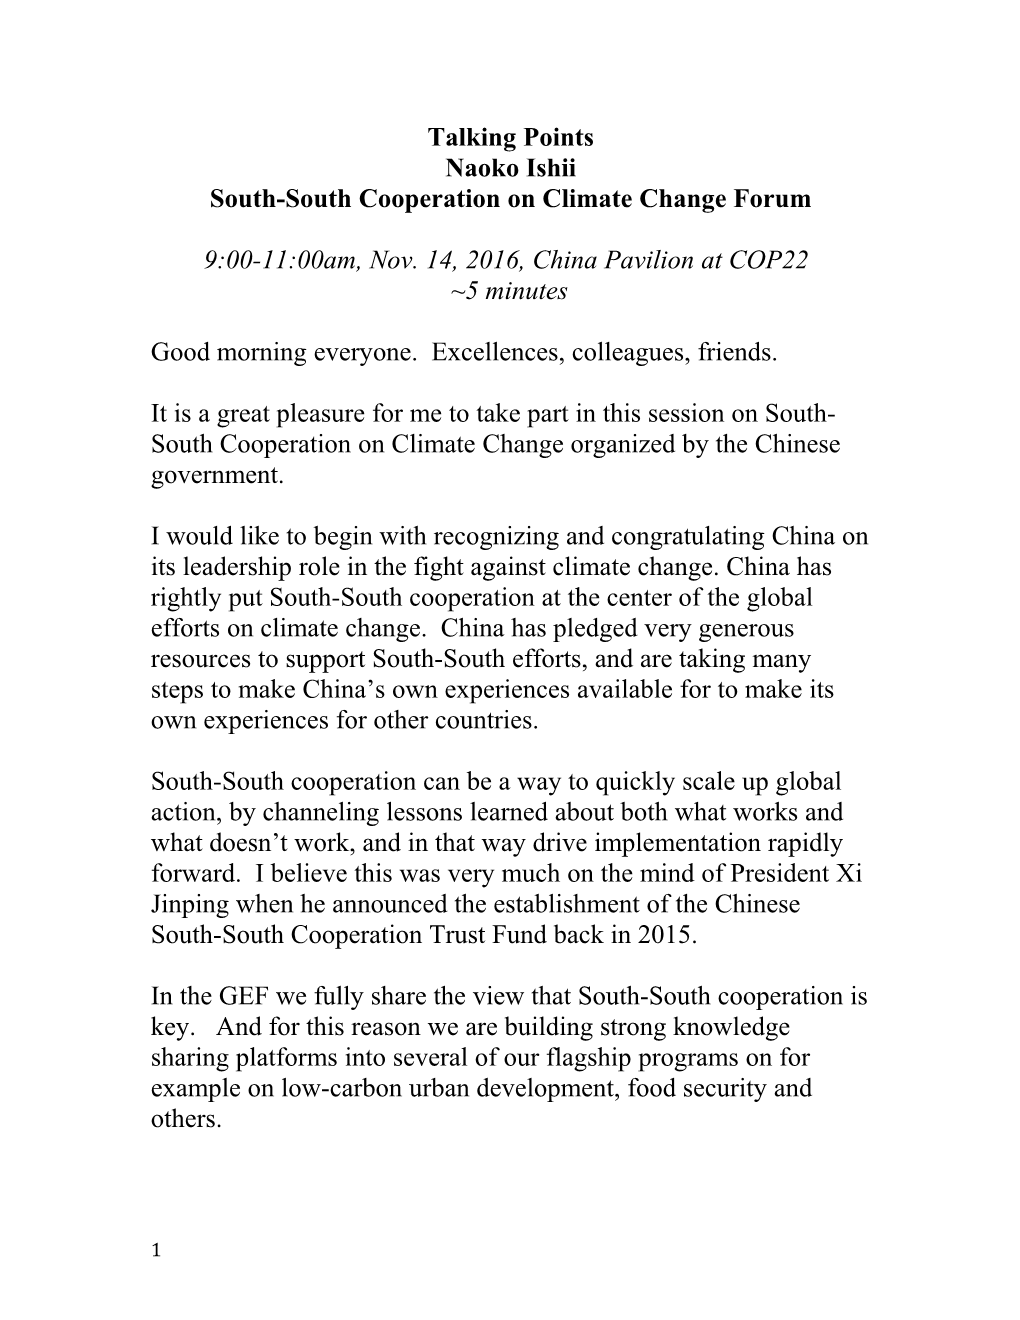 South-South Cooperation on Climate Change Forum